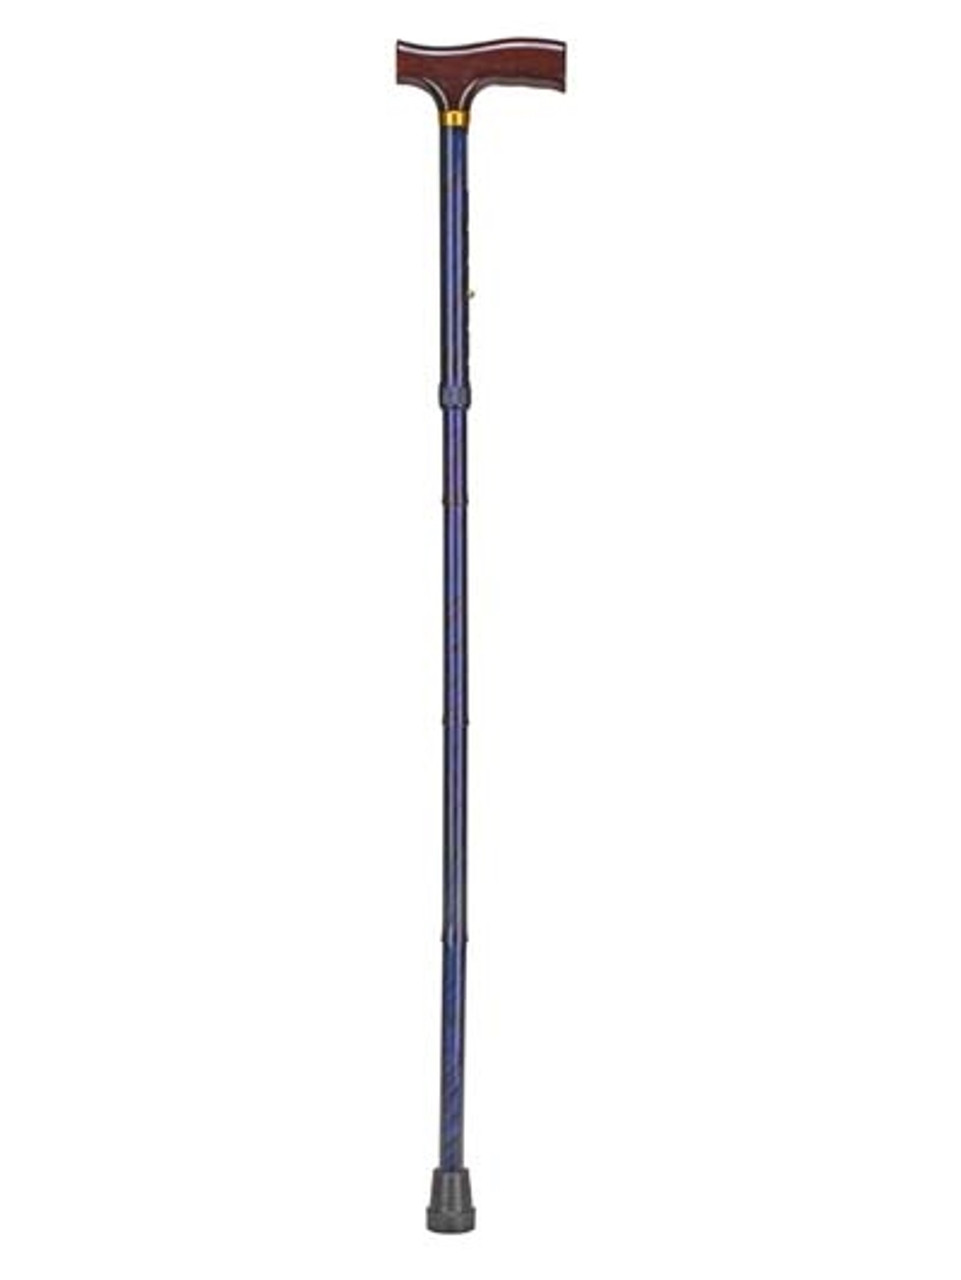 Adjustable Folding Fancy Cane with Derby Top Wood Handle